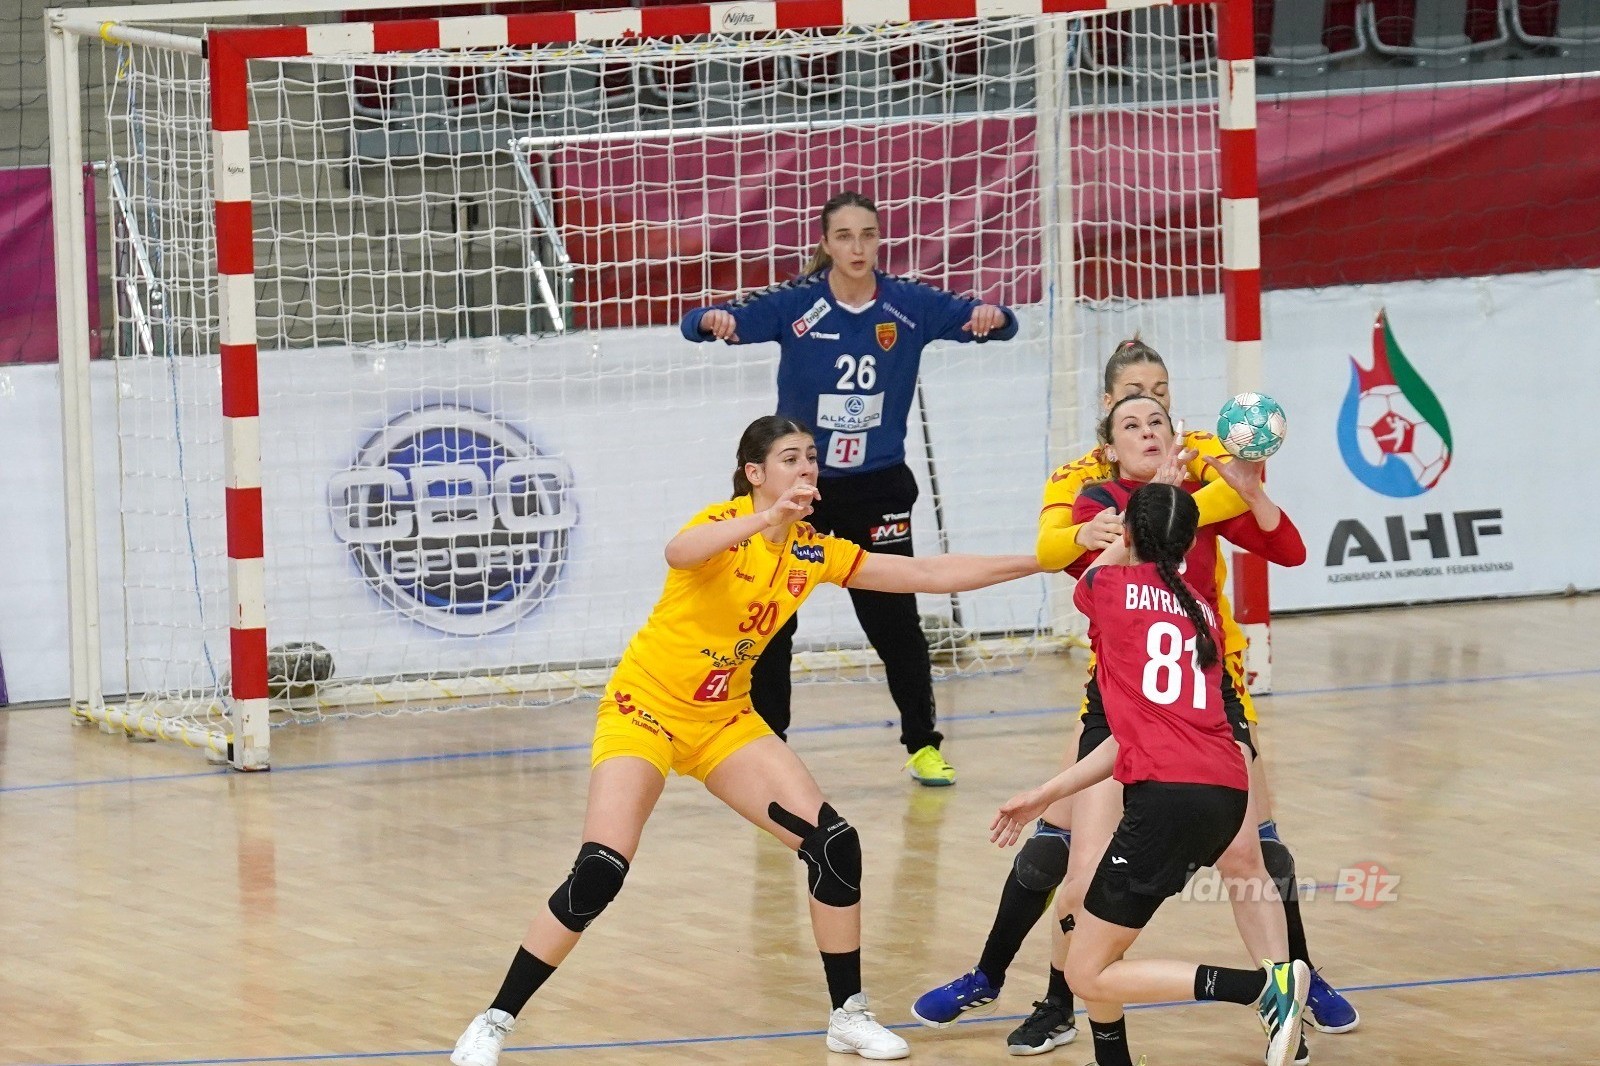 North Macedonian handball player: "We were able to concentrate well for the match in Baku"